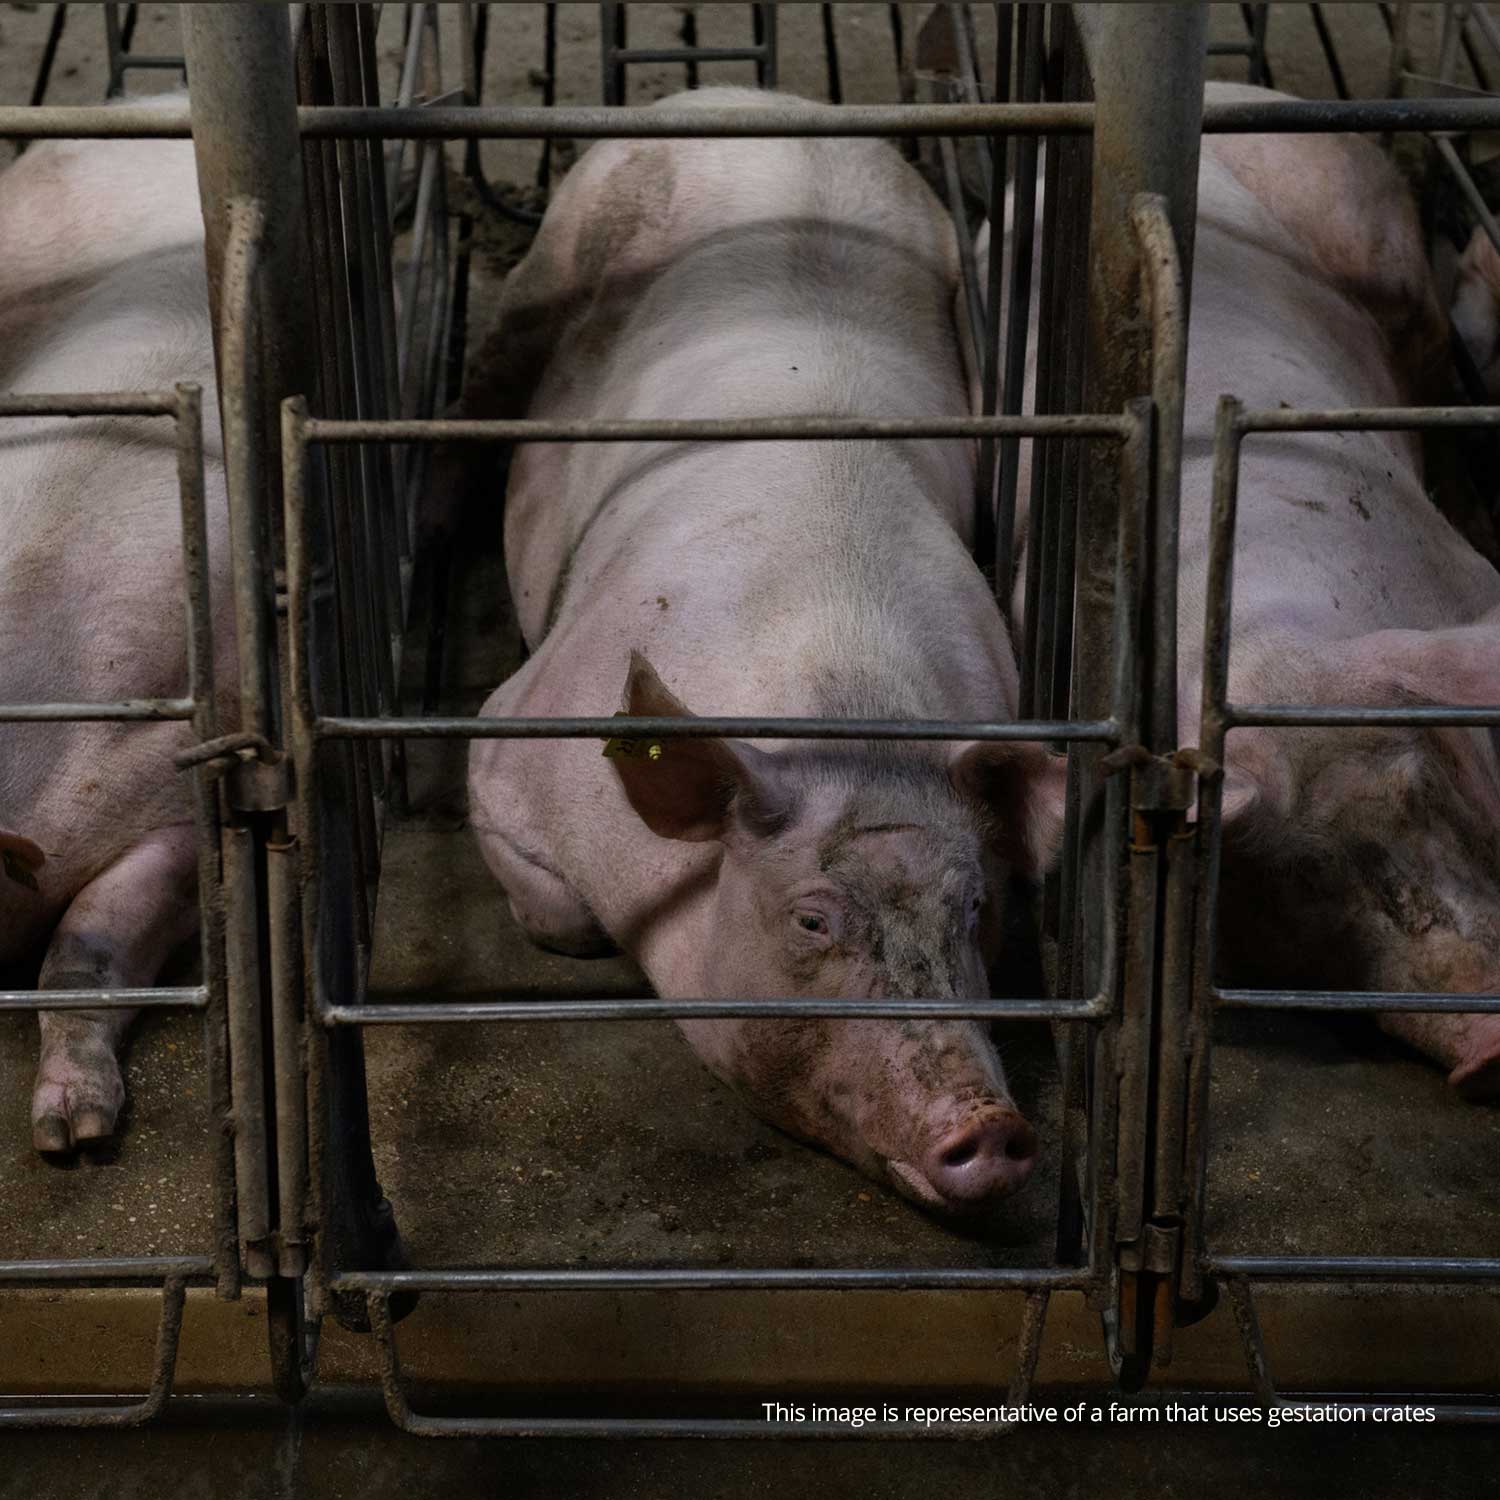 This image is representative of a farm that uses gestation crates